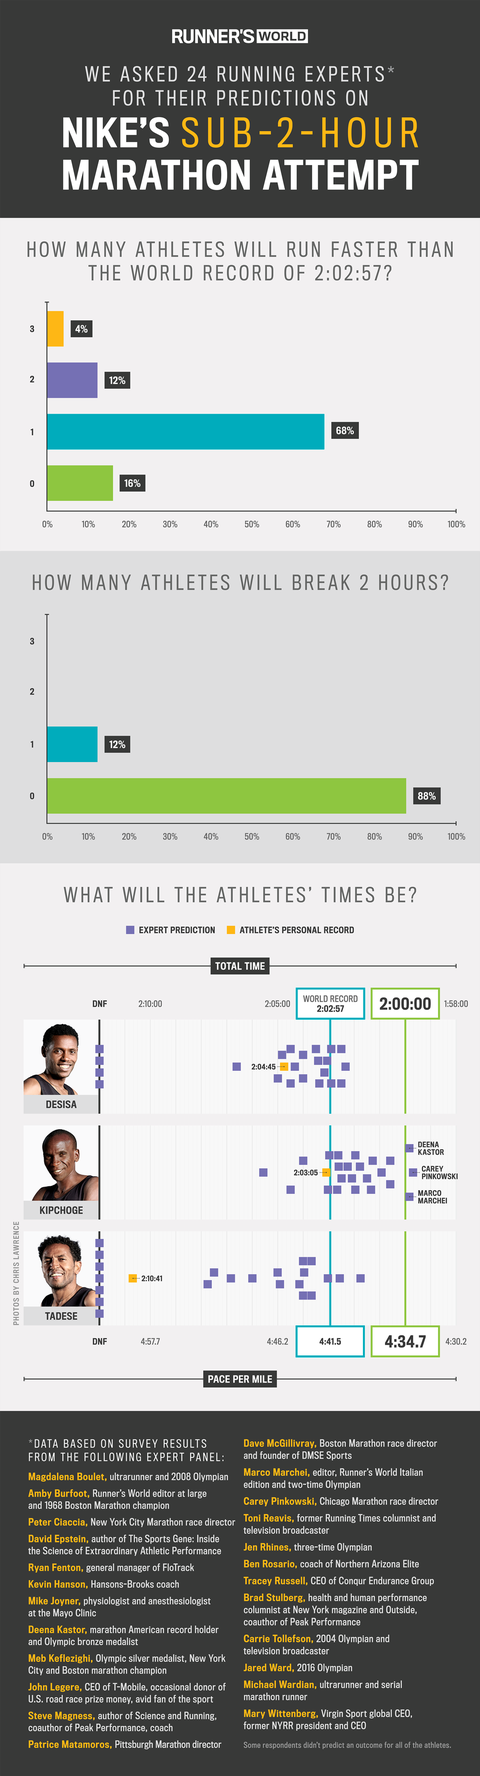 Graphic showing results of RW poll about sub-2-hour marathon